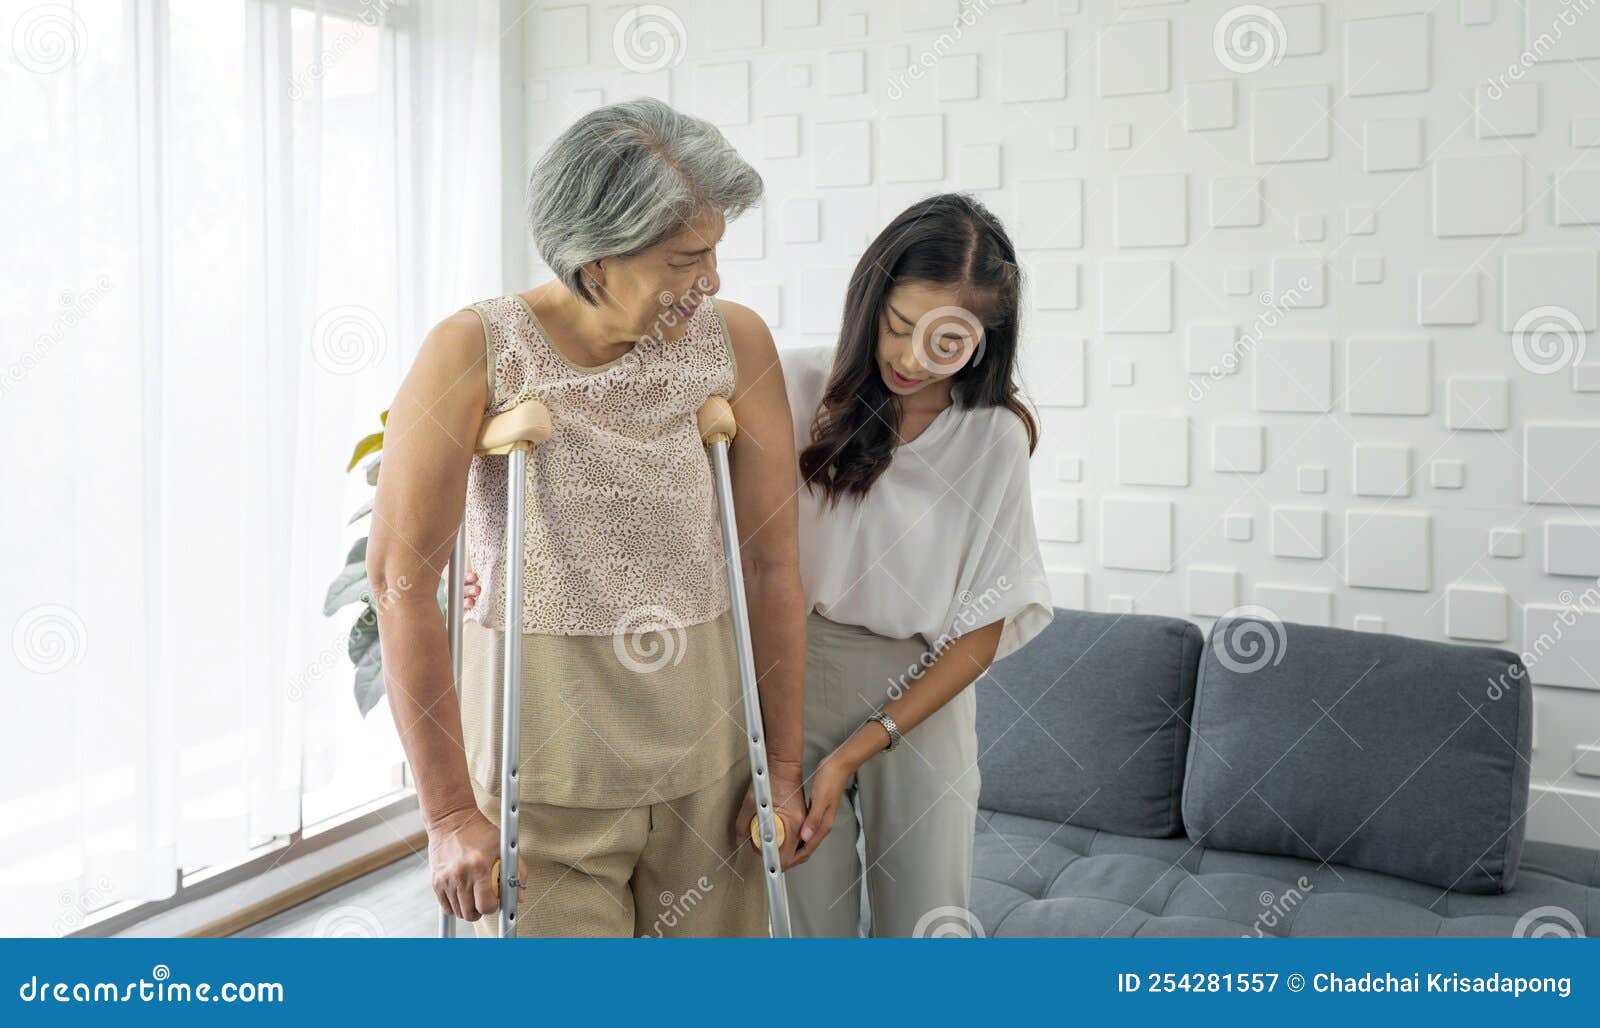 young asian woman help her grandma walk by using axilla crutches. senior gray hair woman exercise and practice walking at home